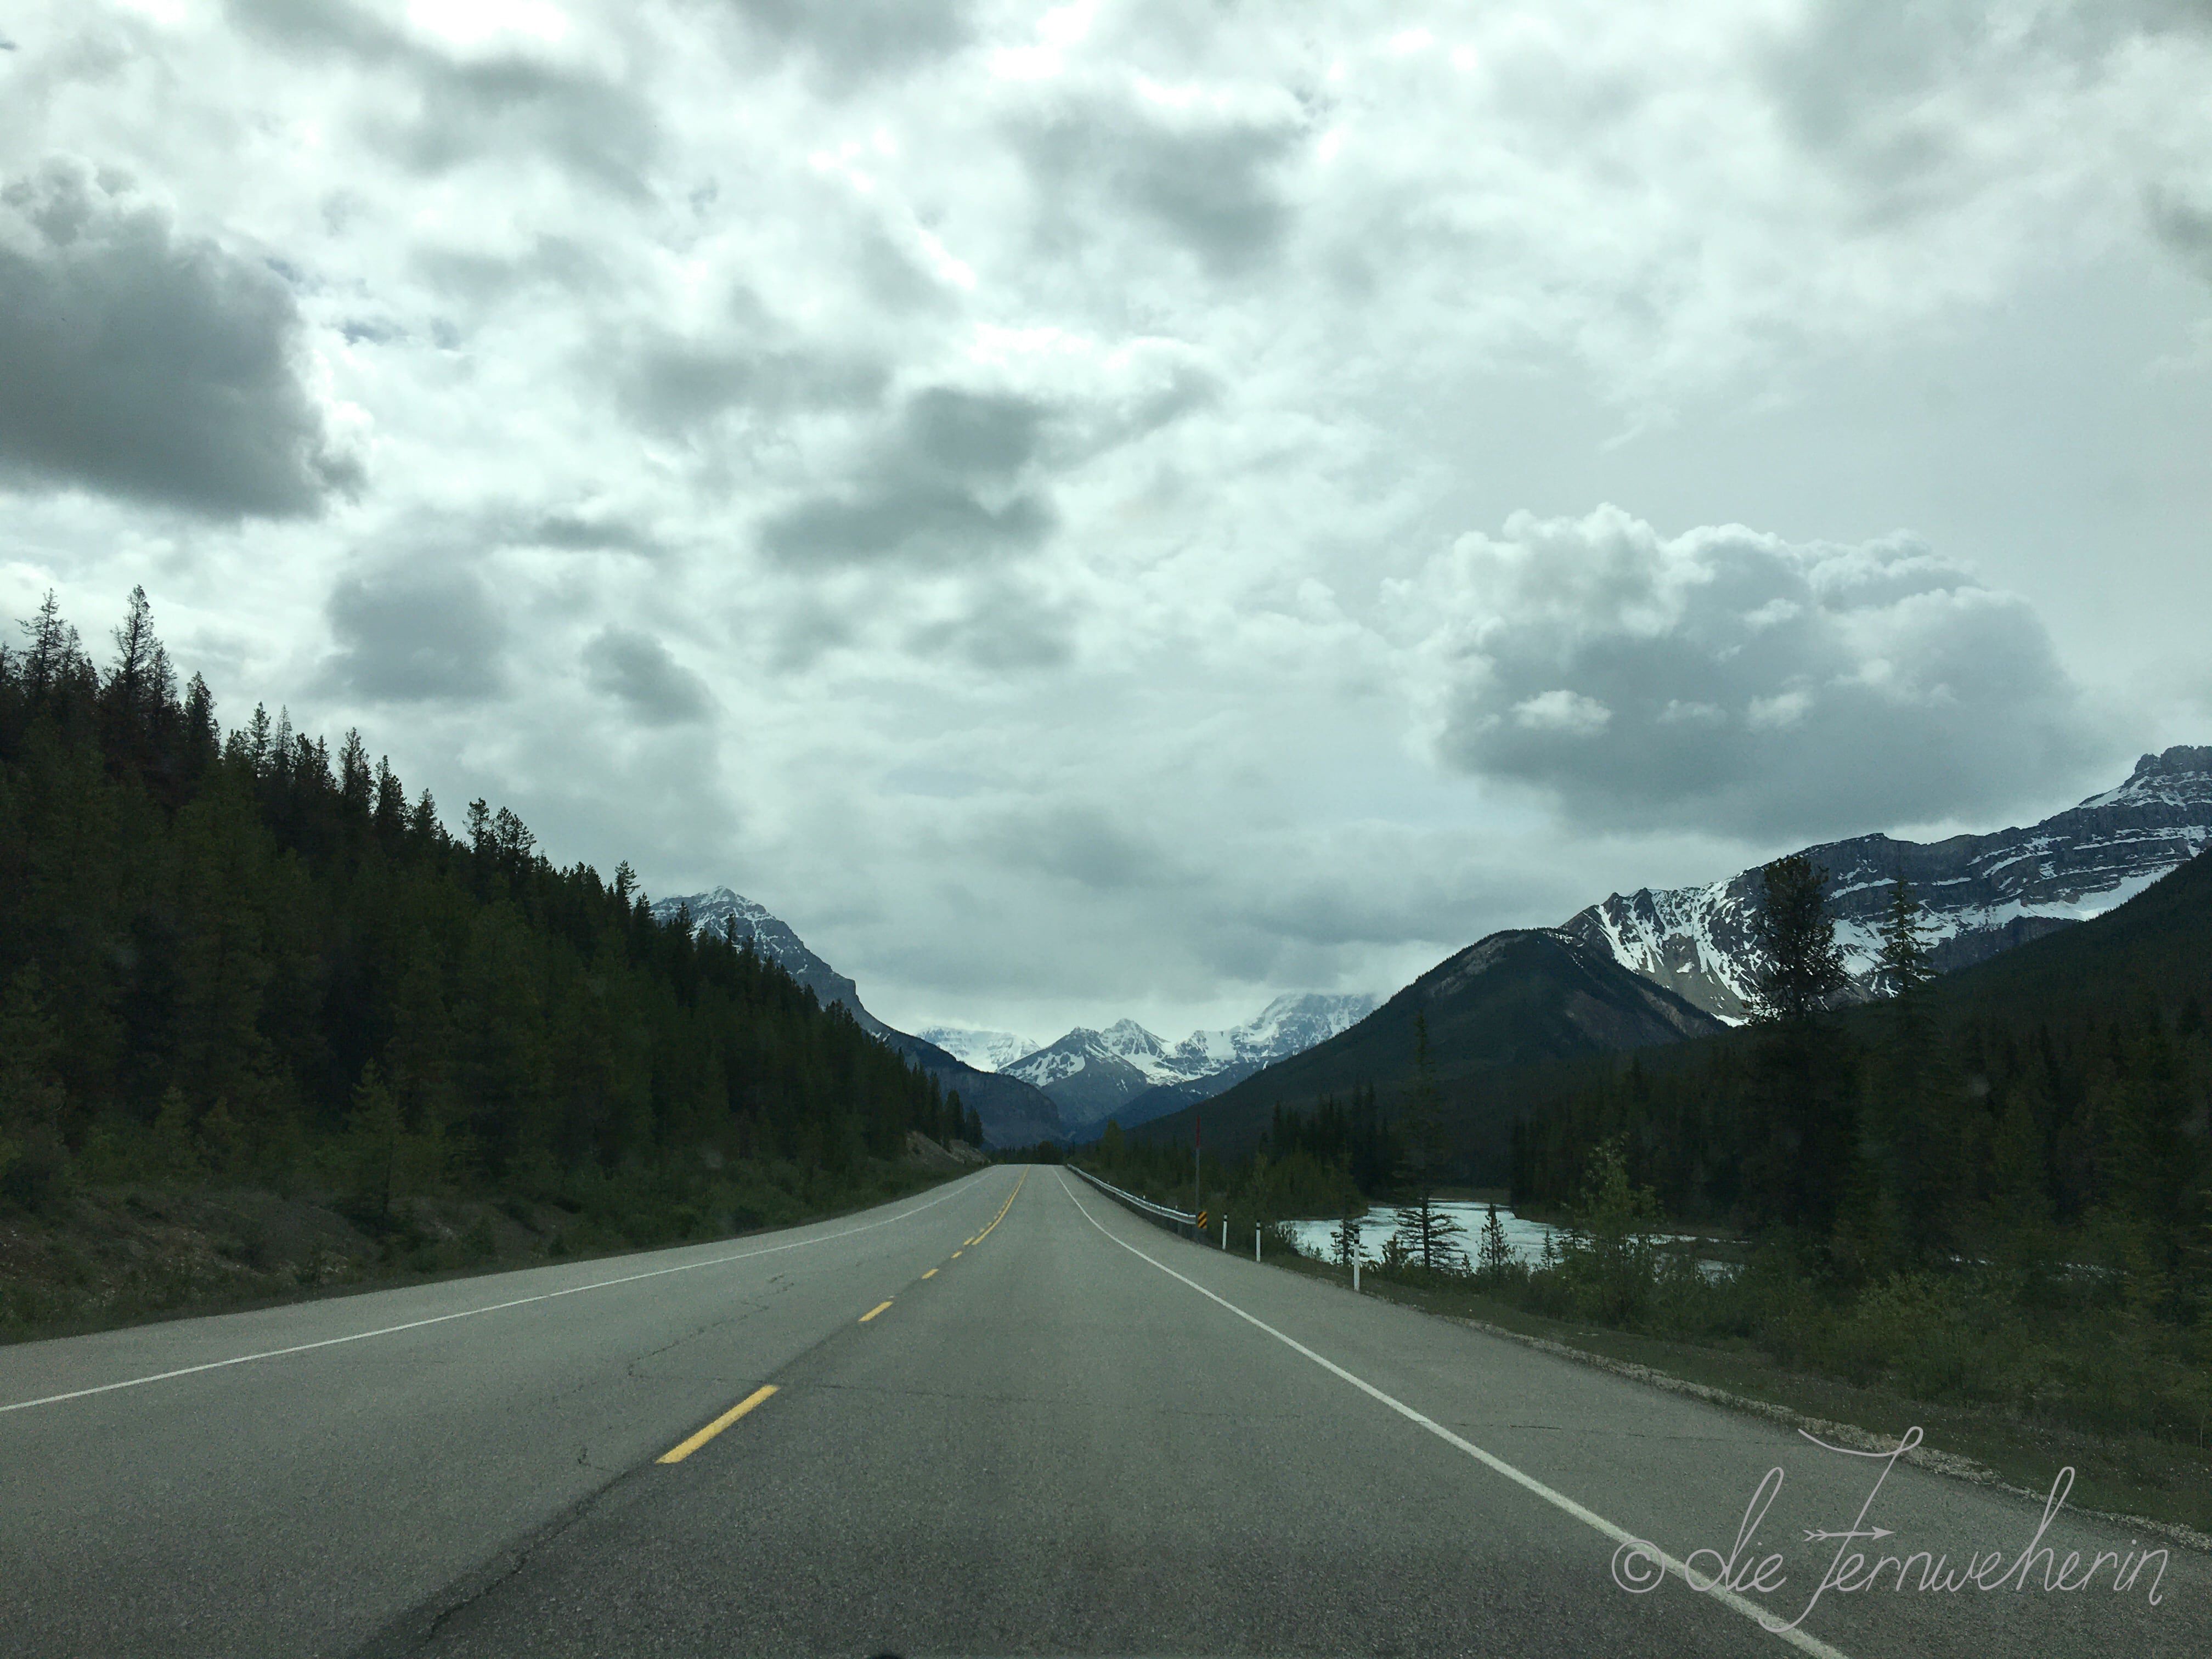 Driving the Icefields Parkway in Banff National Park on an overcast day.